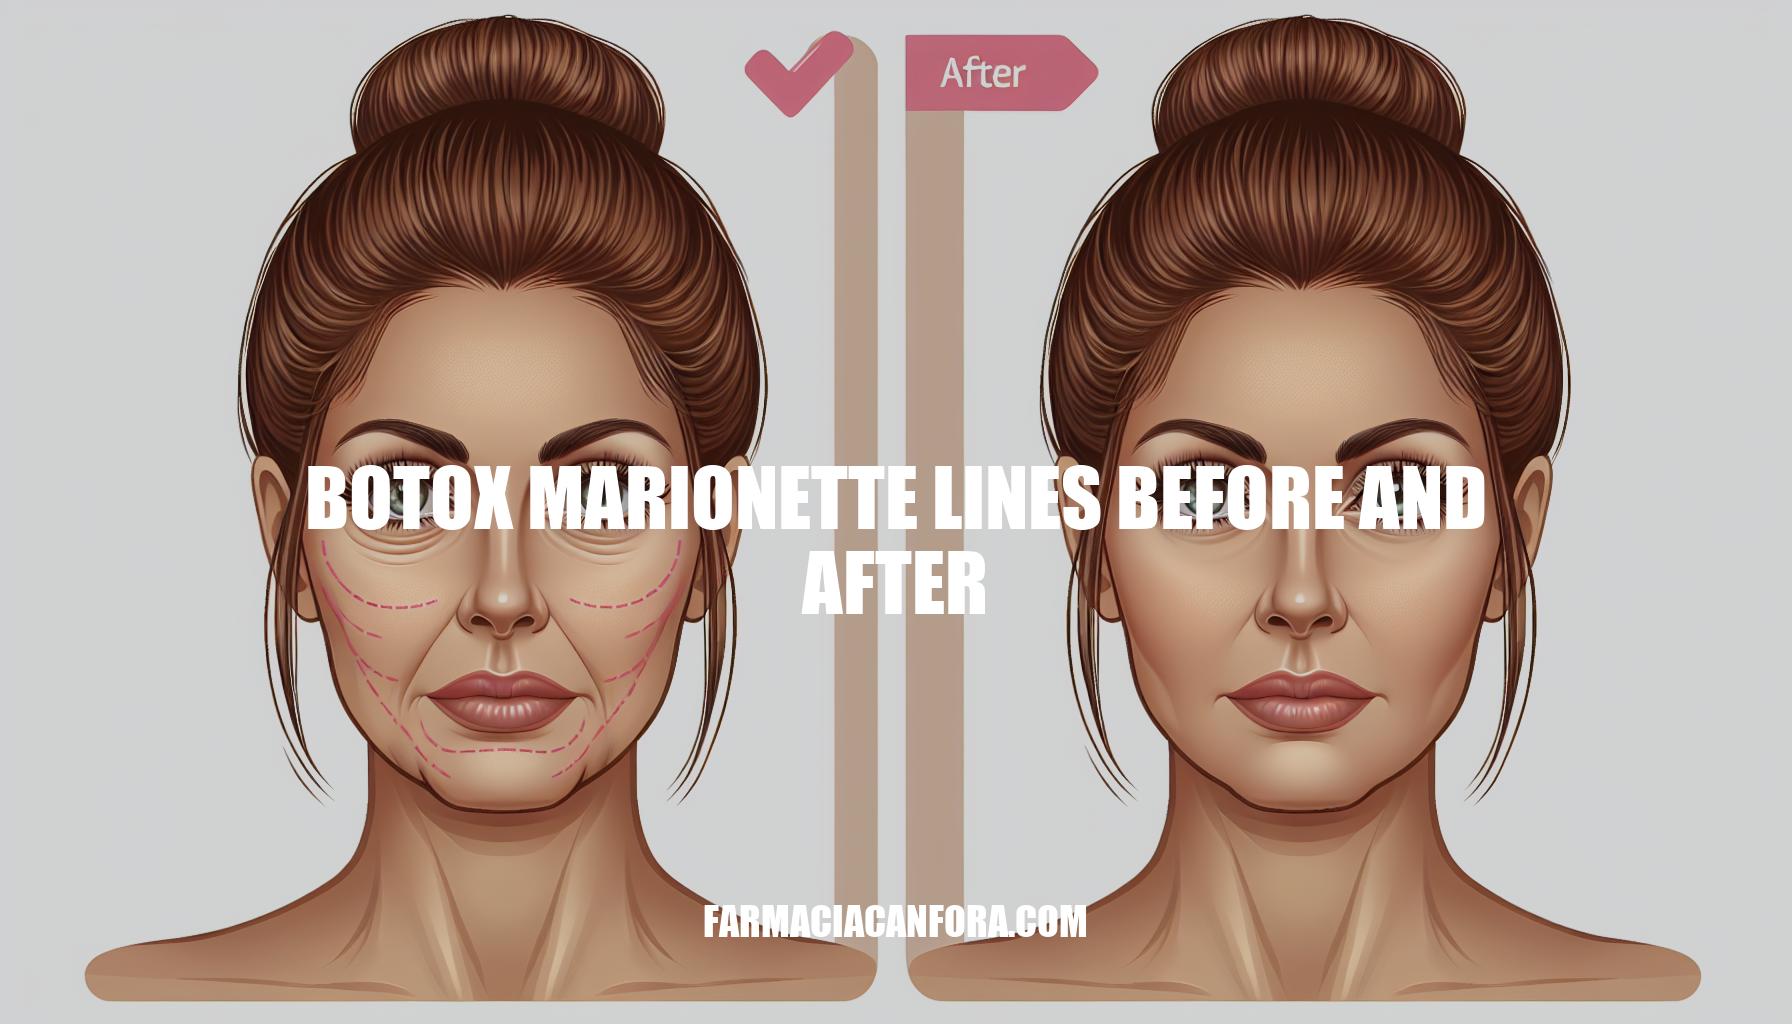 Botox for Marionette Lines Before and After